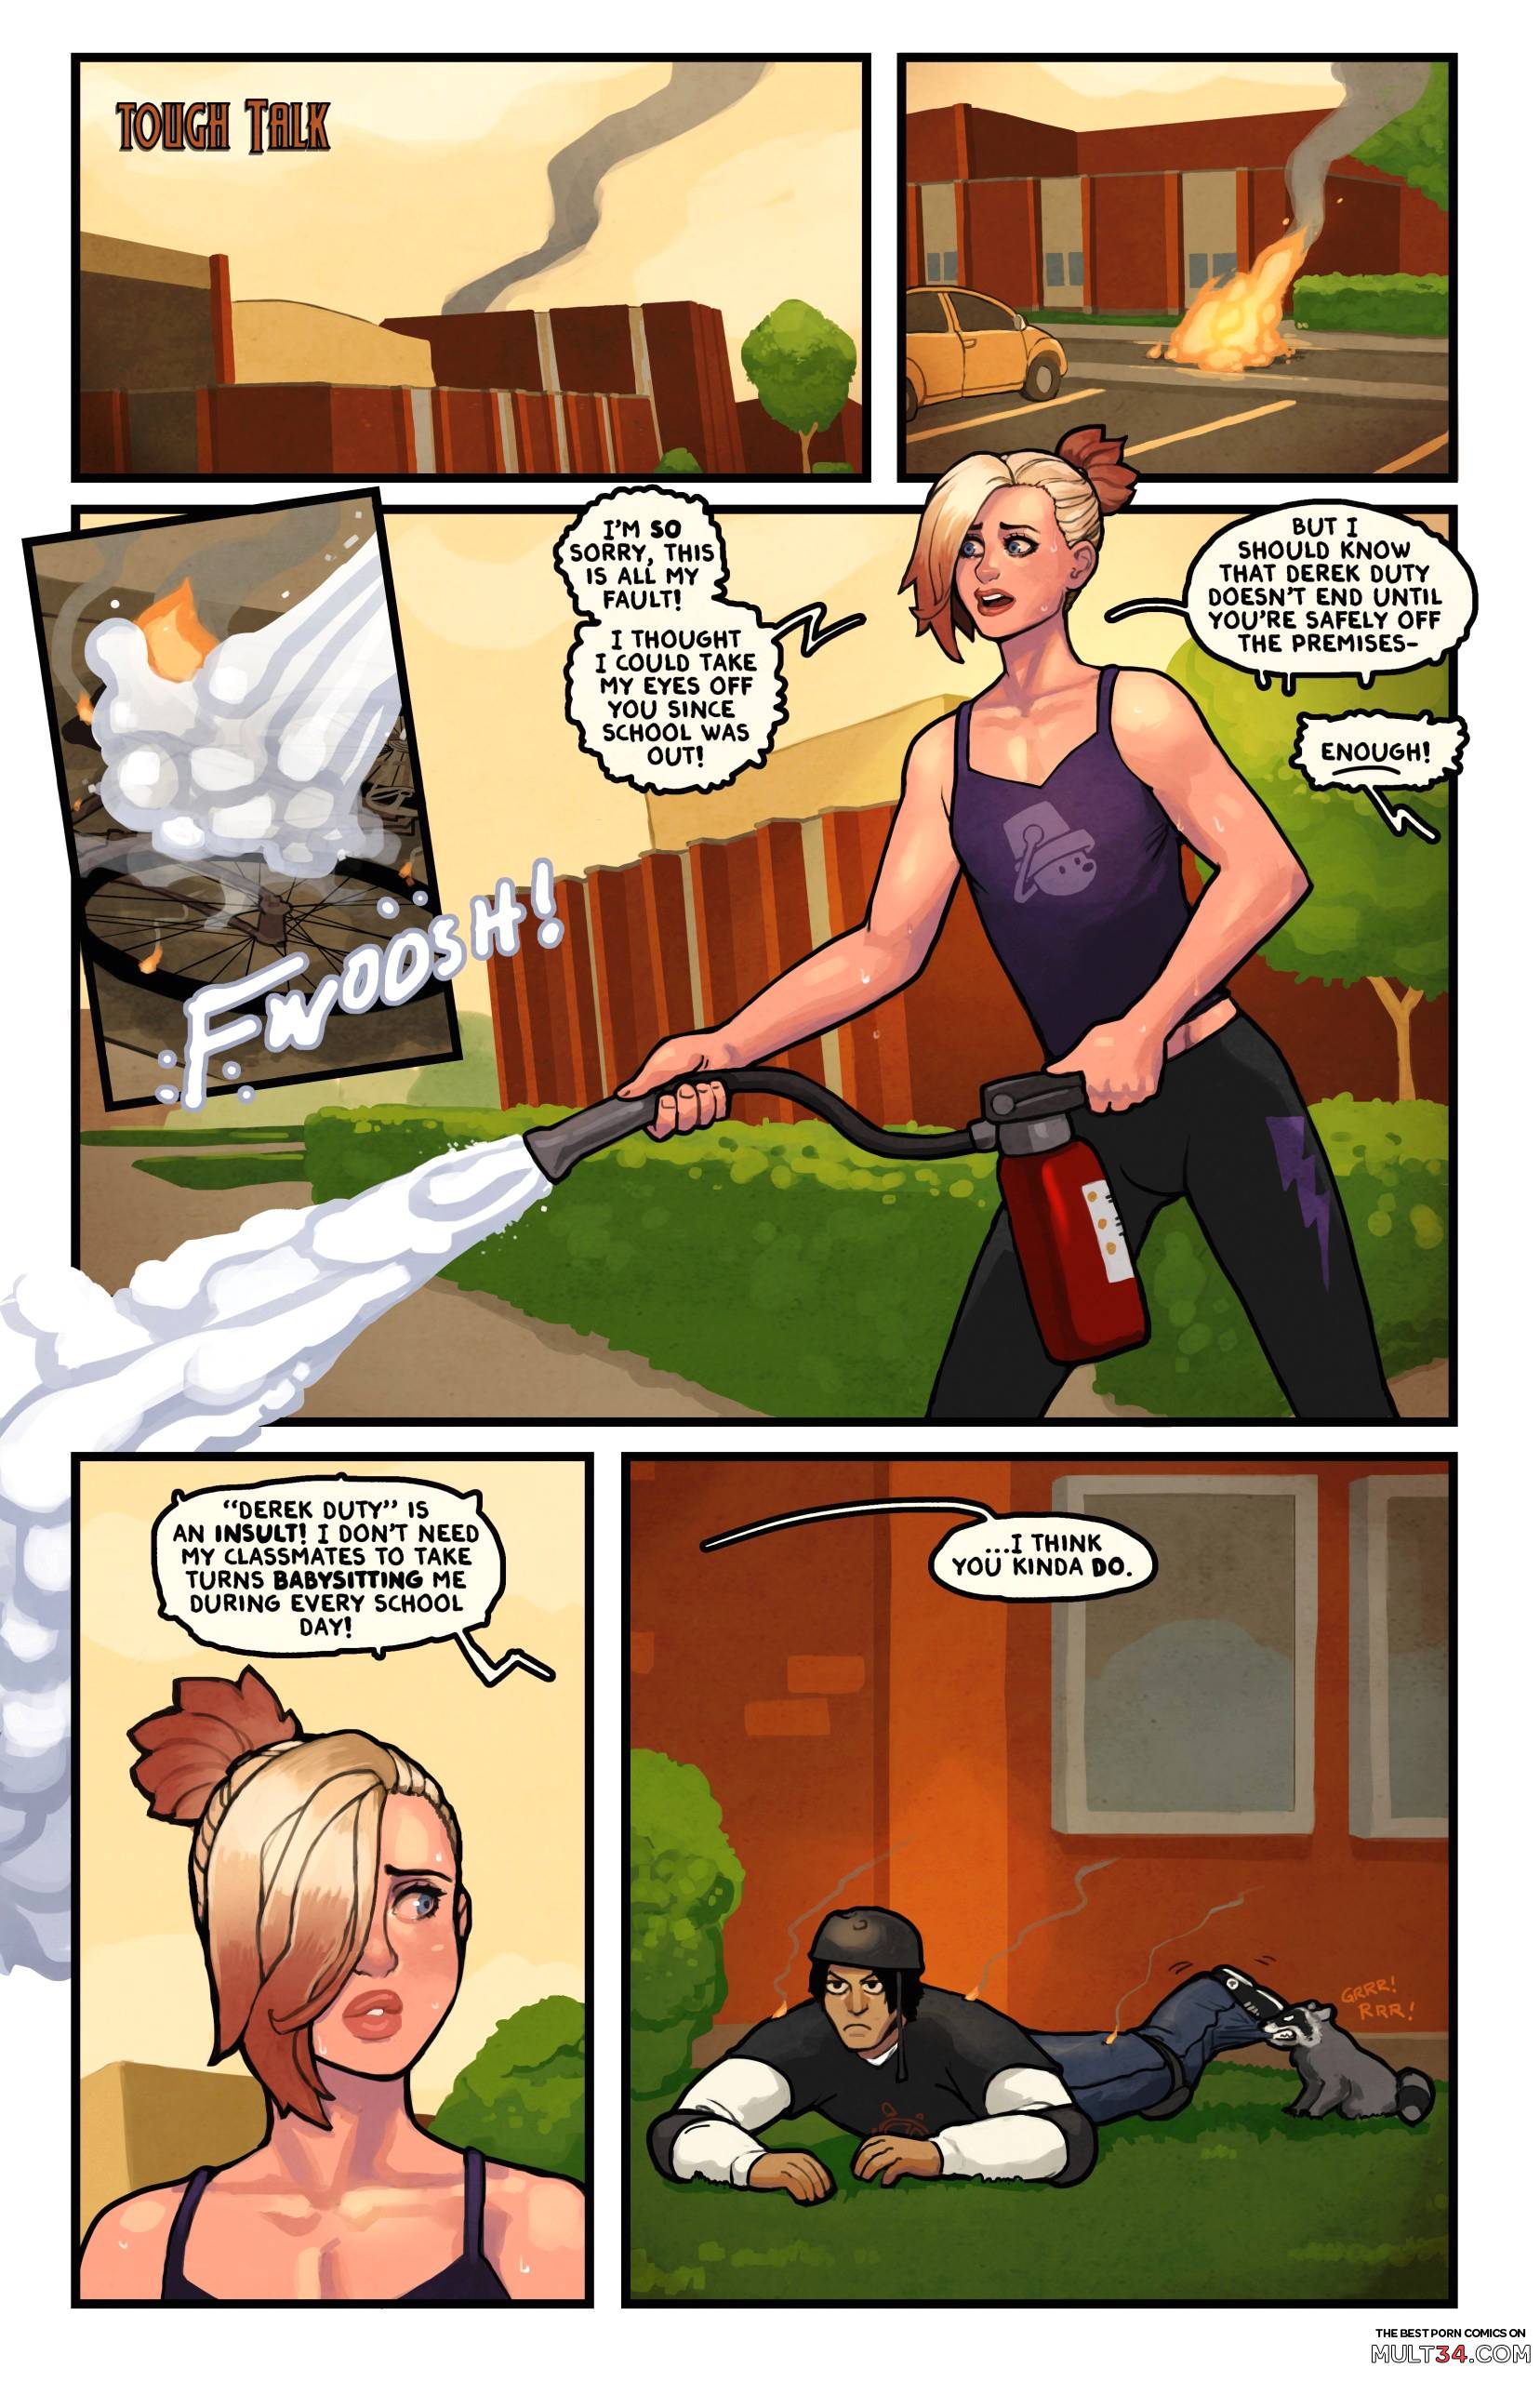 This Romantic World part 2 page 2